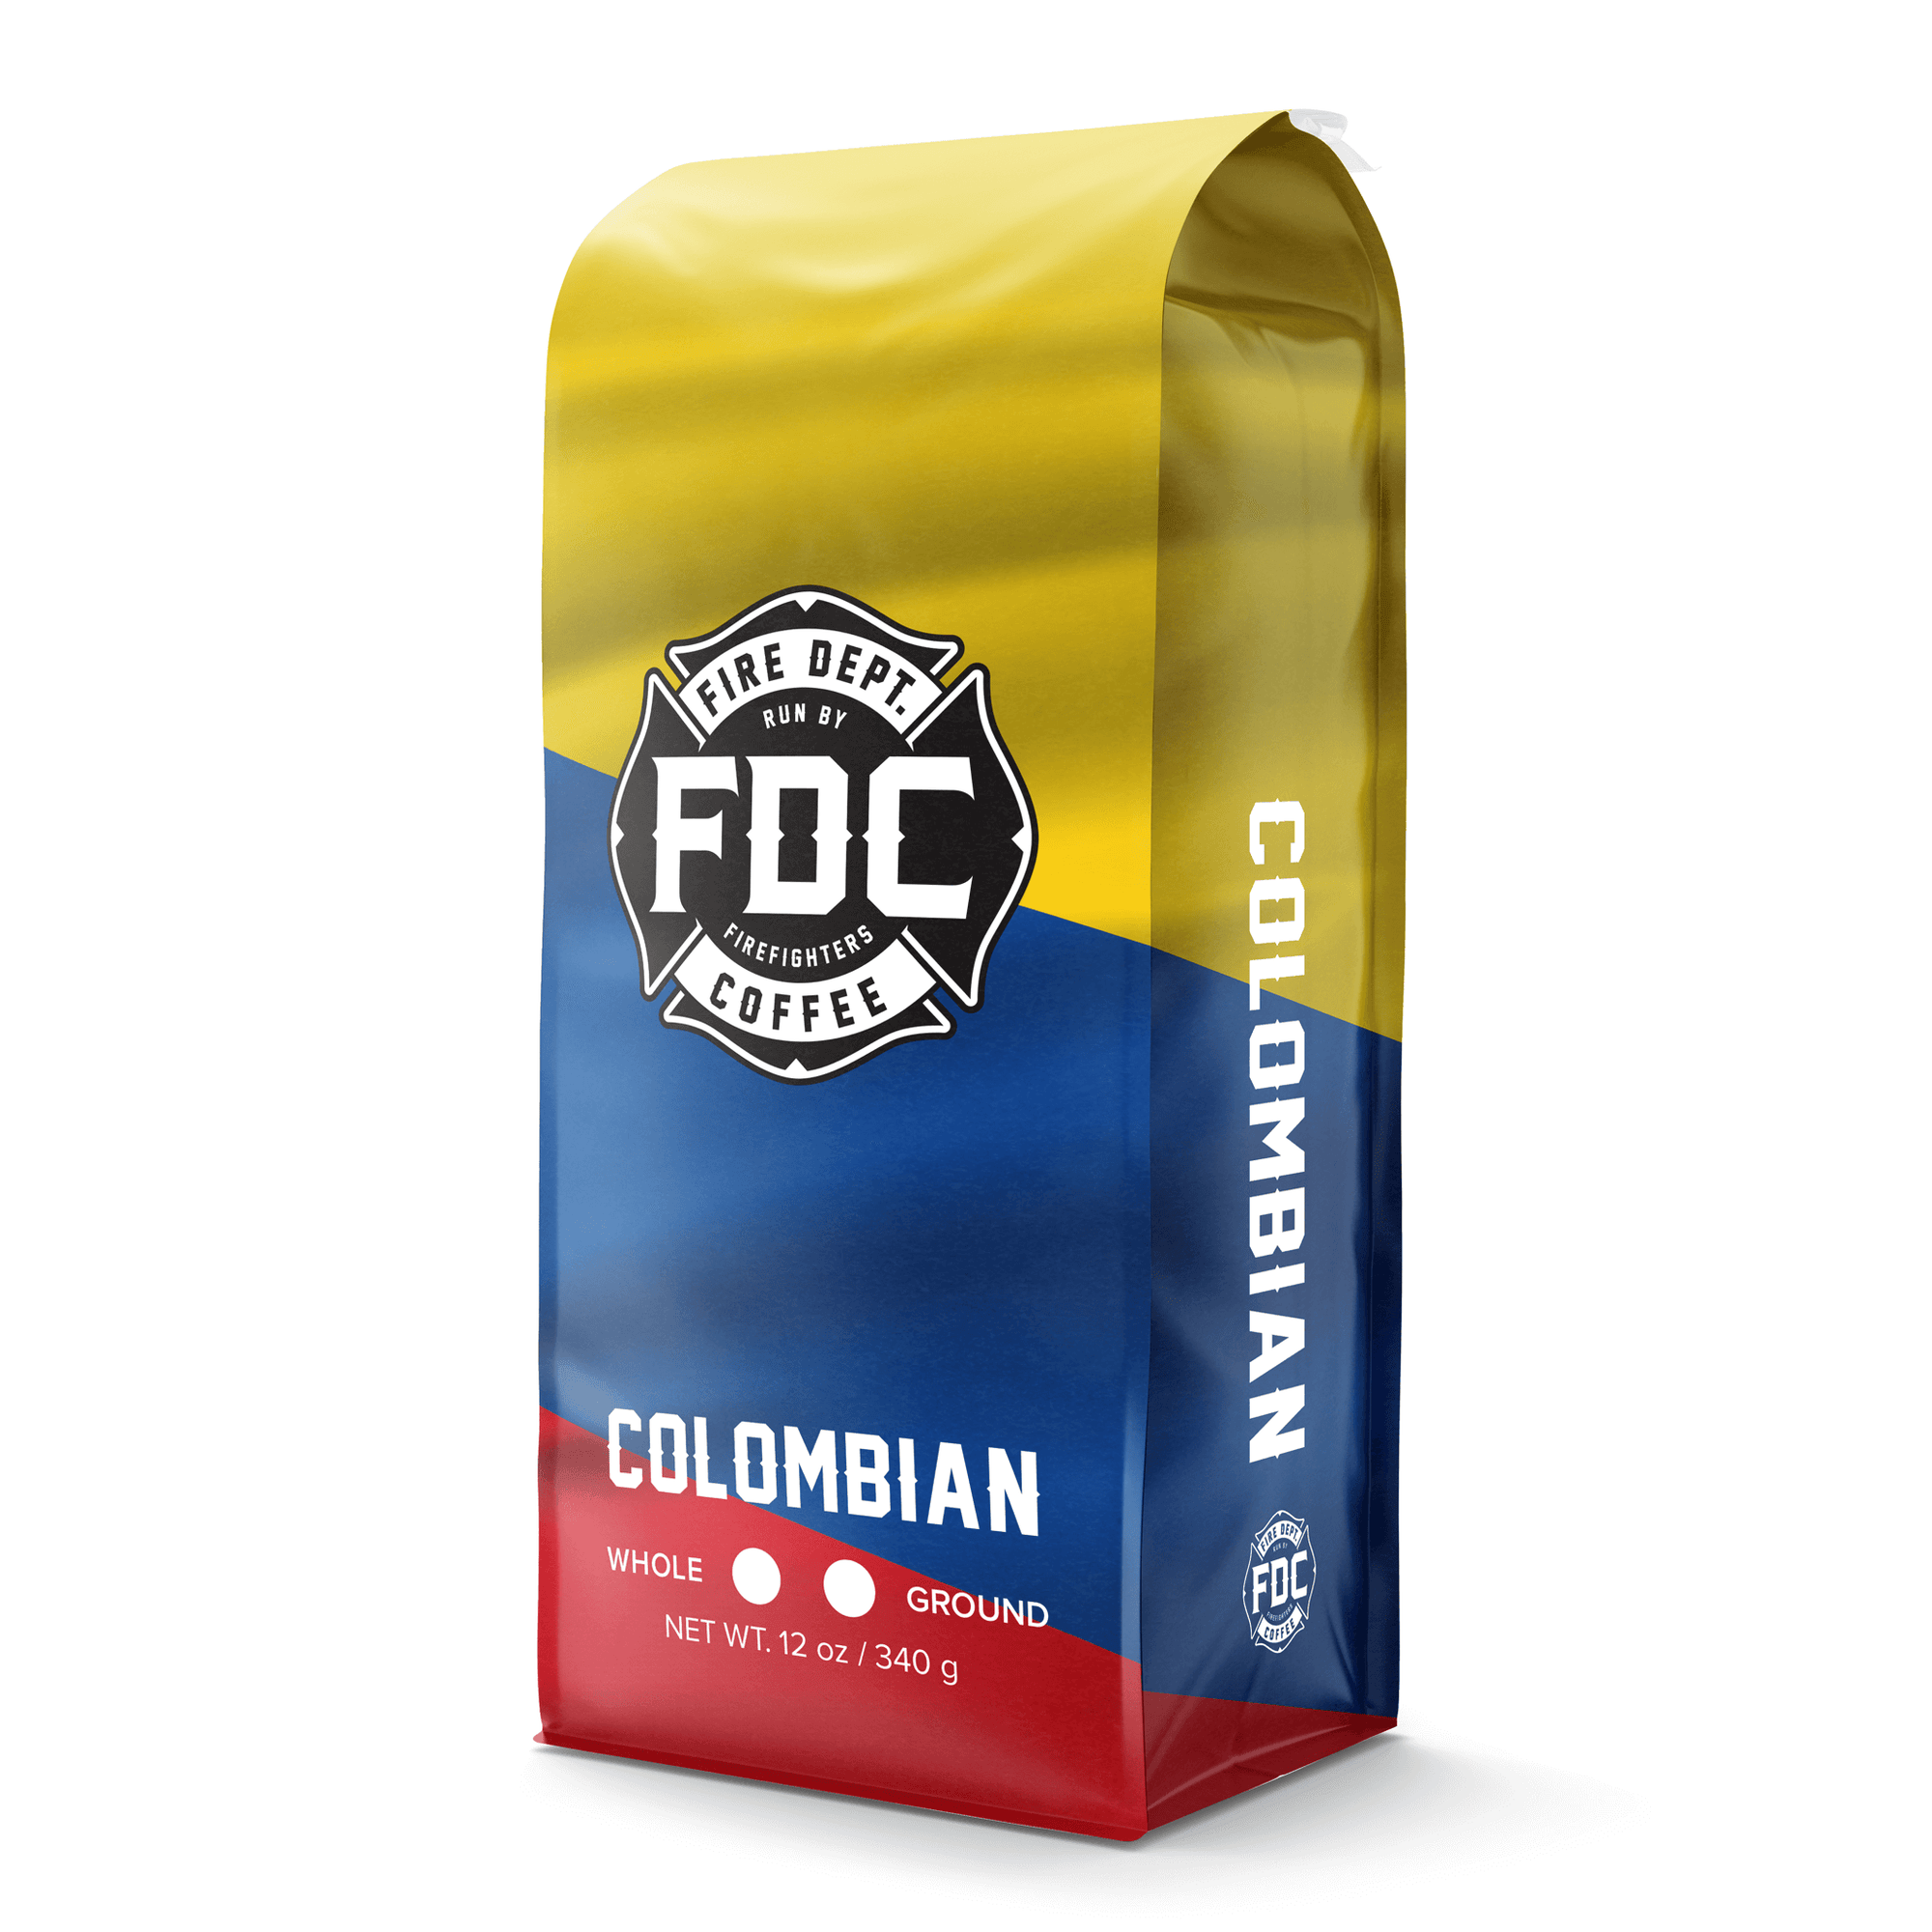 Fire Dept. Coffee's 12 ounce Colombian Coffee in a rectangular package with Colombian flag design.